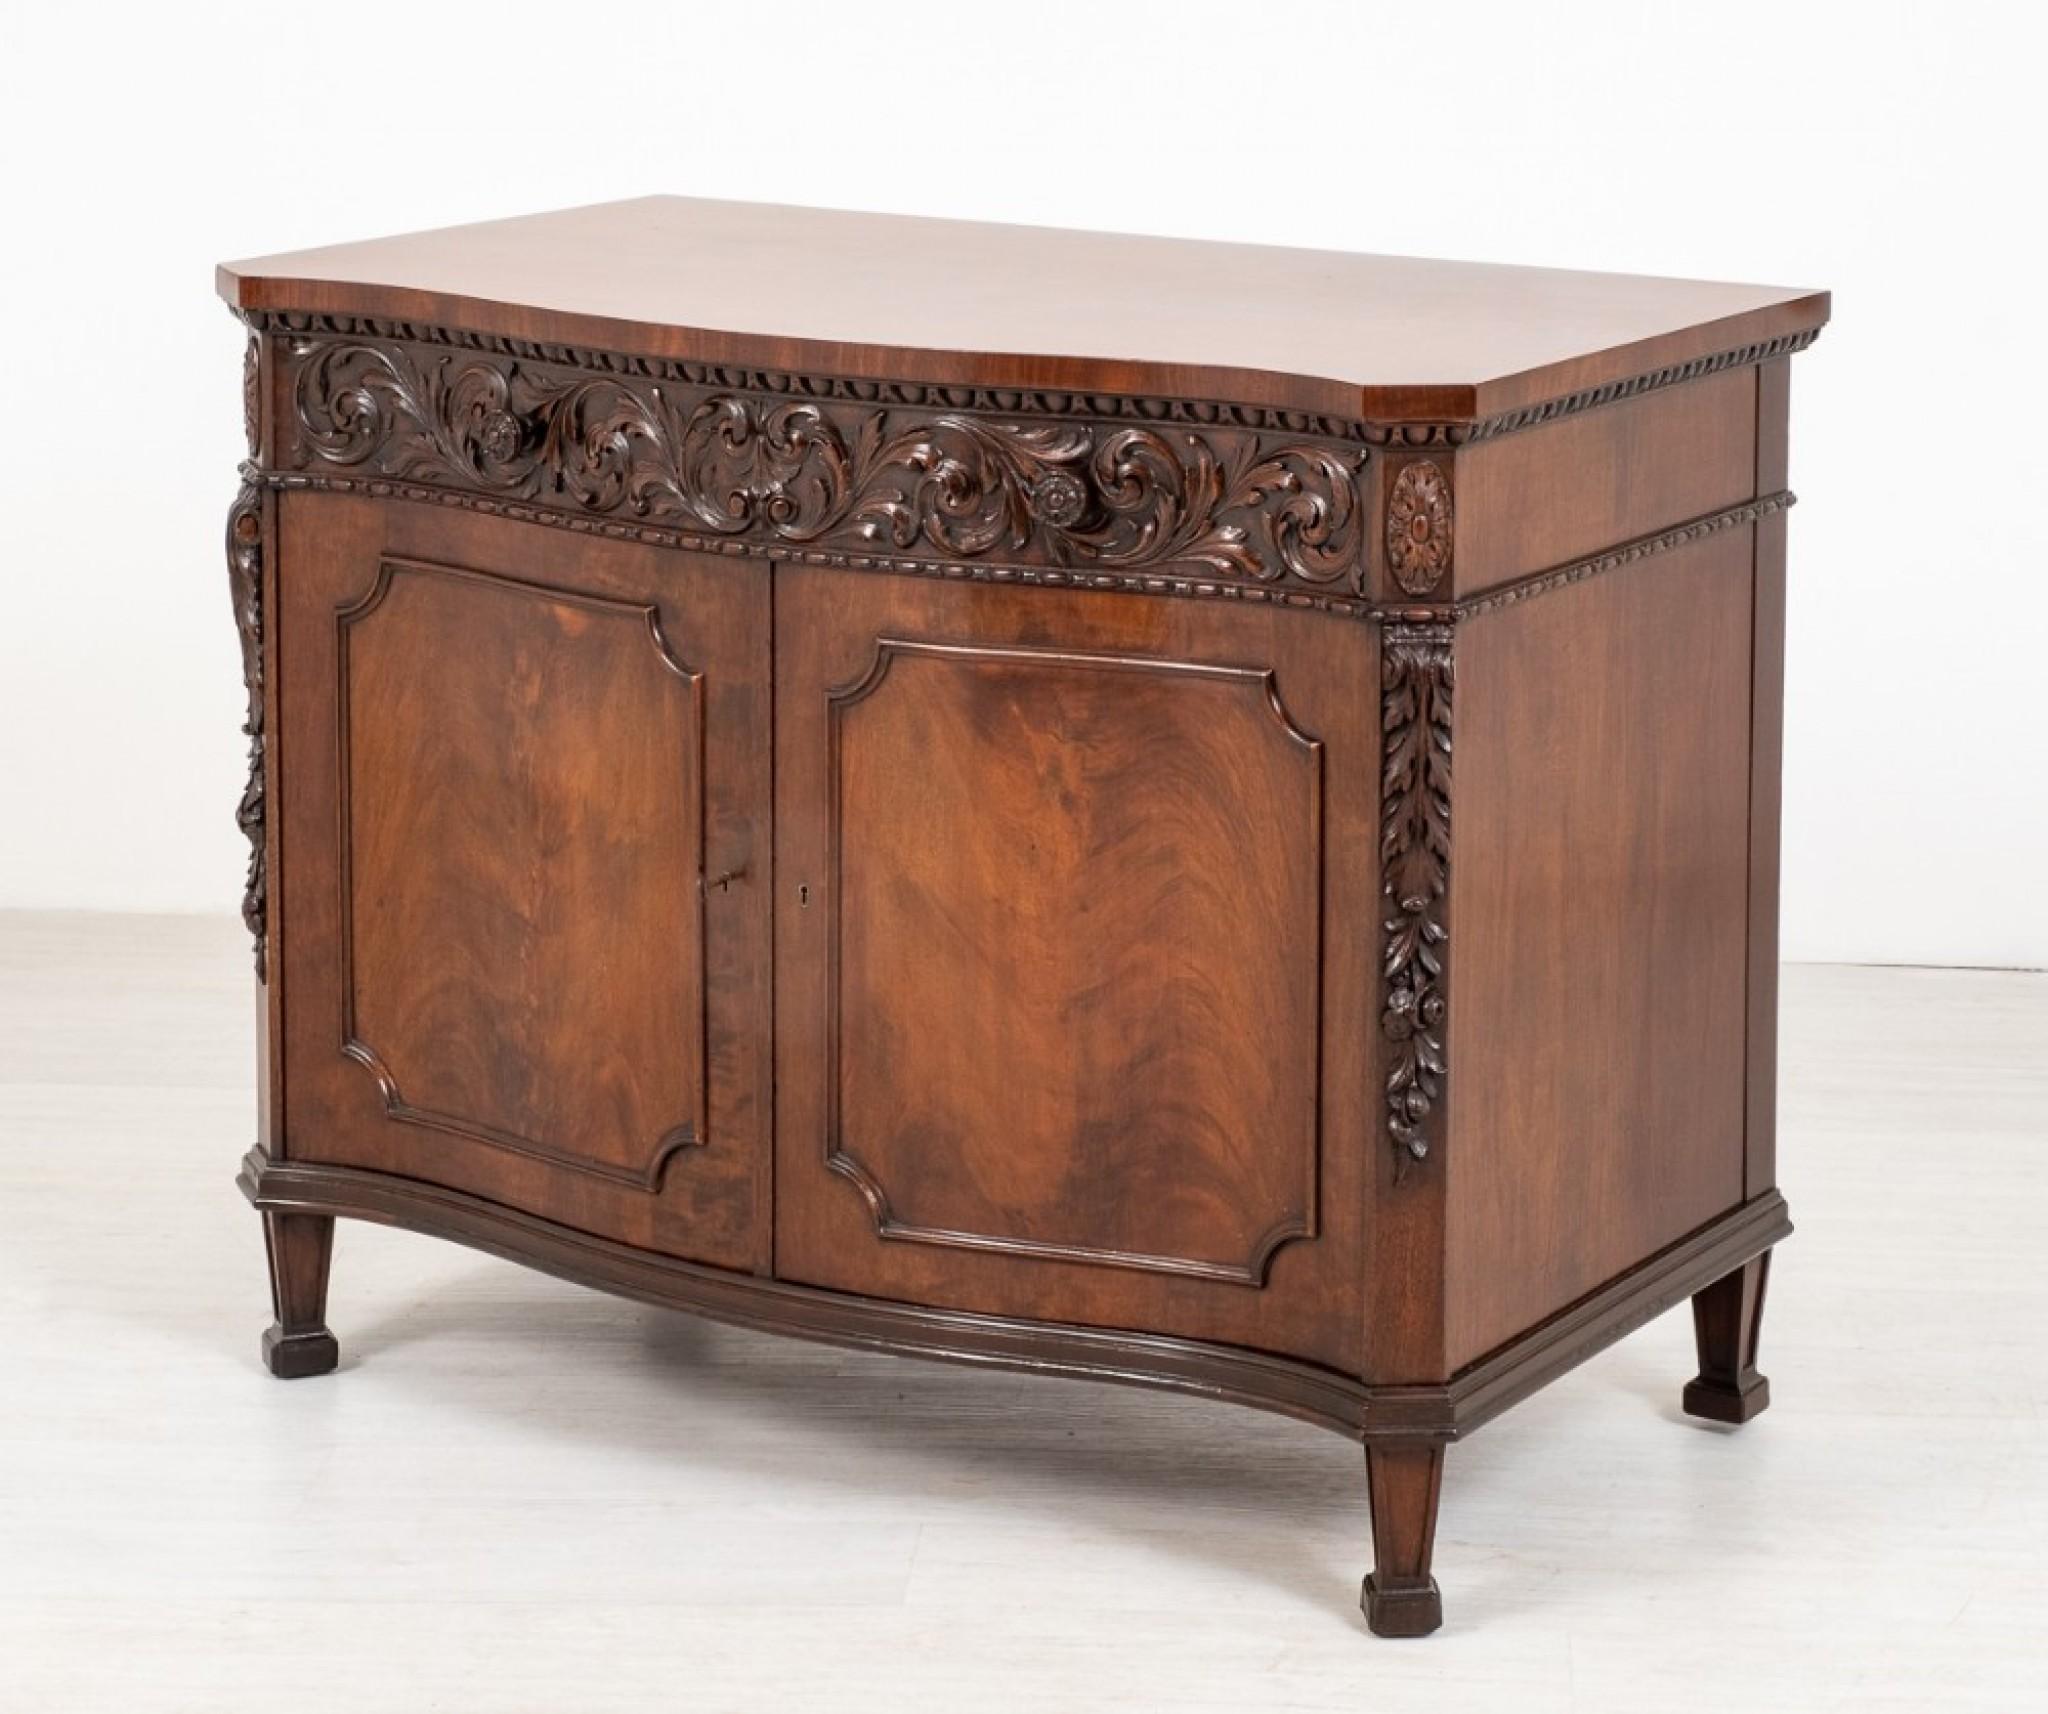 A wonderful quality mahogany 2 door side cabinet of serpentine form.
Standing Upon Tapered Legs with Block Feet.
circa 1900
Having 2 Panelled Doors Which Feature Wonderful Mahogany Timbers.
The Doors Open To Reveal a Bank of Drawers and